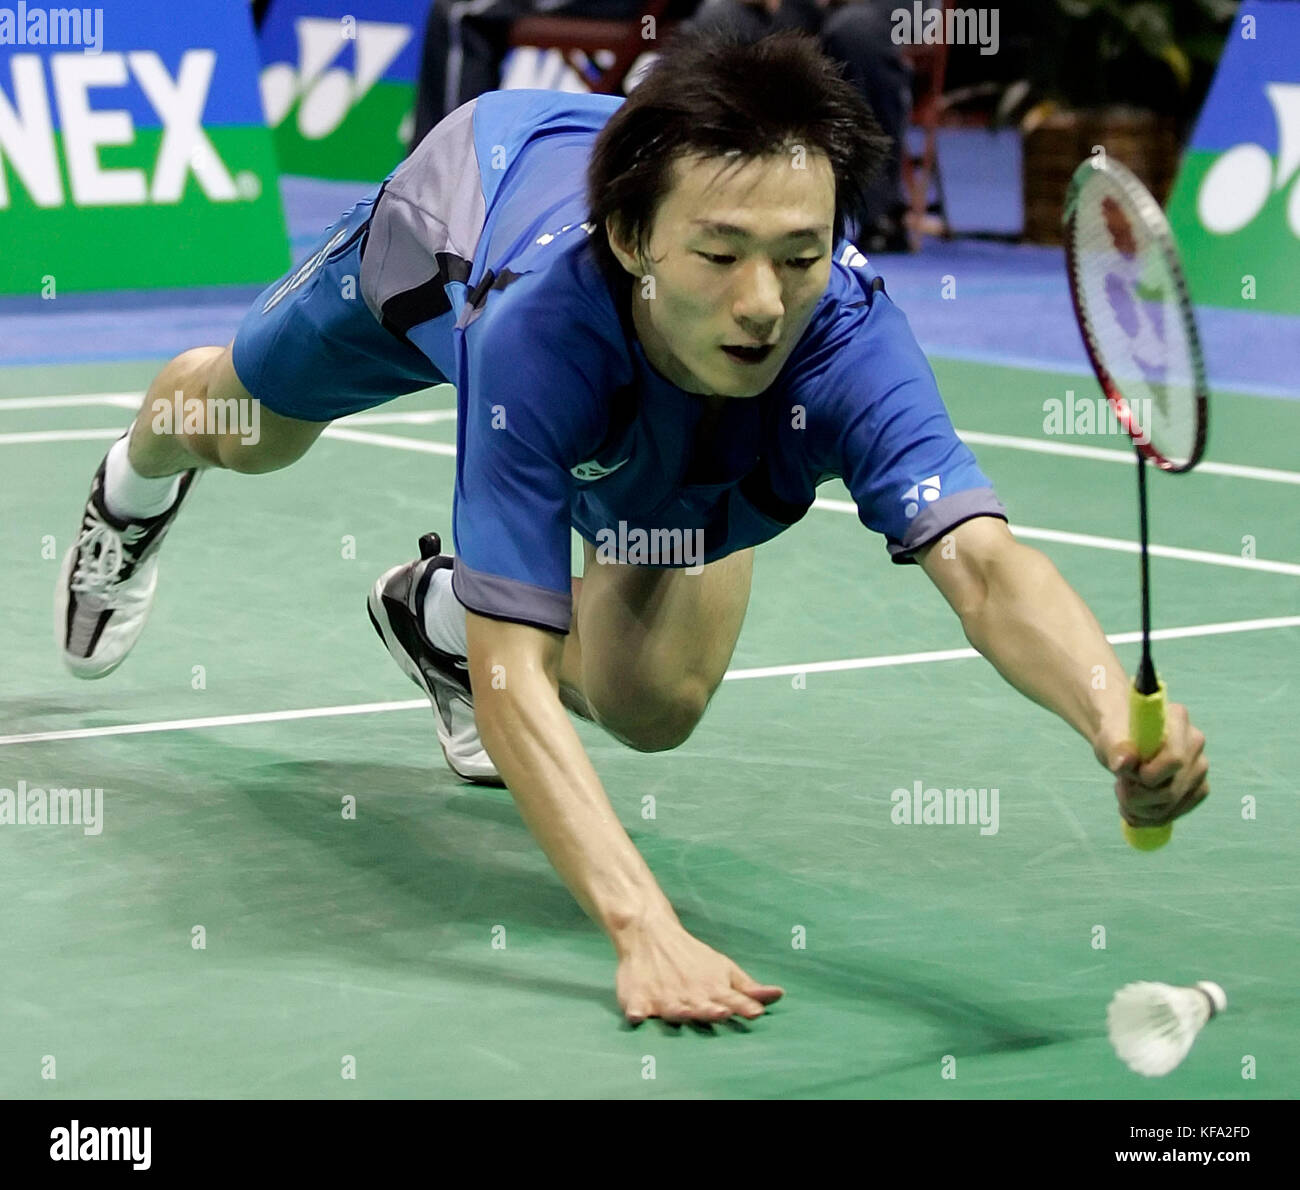 Hyun Ii Lee of Korea dives for the shuttlecock during a quarterfinal match  against Dan Lin of China at the IBF Badminton World Championships in  Anaheim, Calif. on Friday, Aug. 19, 2005.